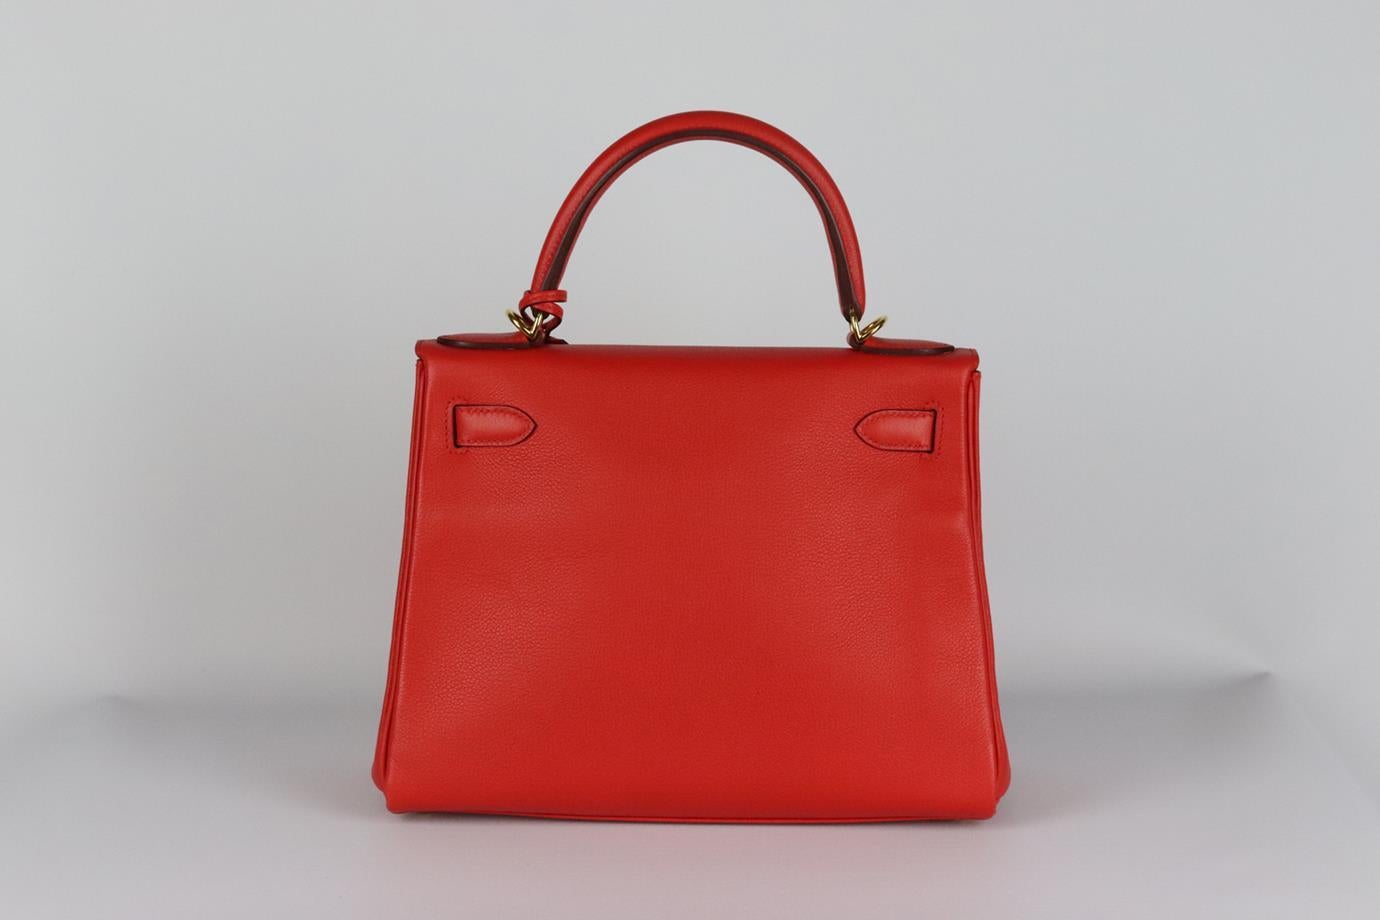 Hermès 2016 Kelly Retourne 28cm Evergrain Leather Bag In Excellent Condition For Sale In London, GB